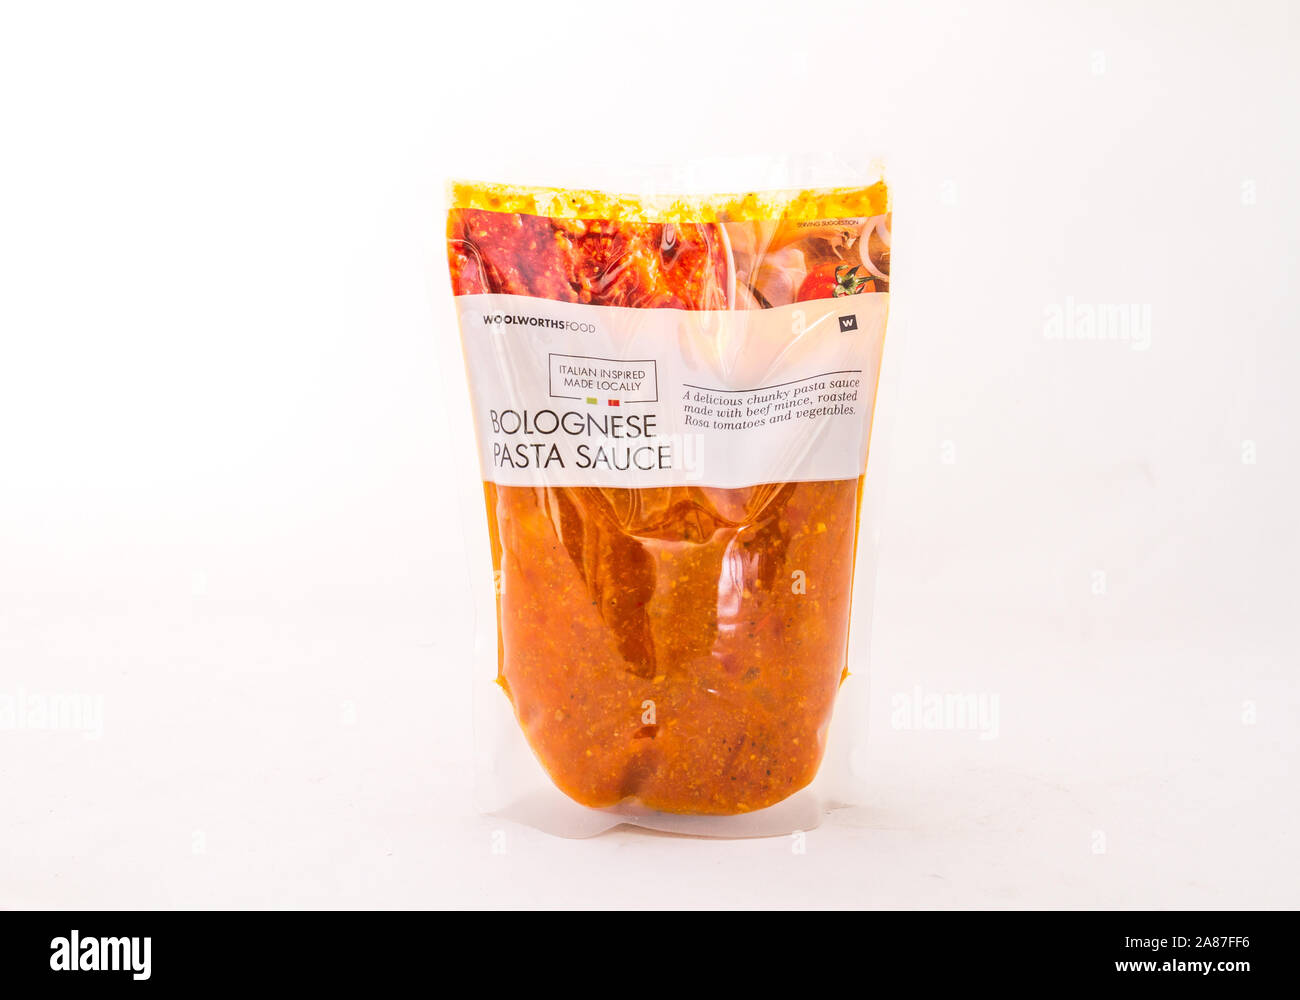 Alberton, South Africa - a bag of Woolworths Food bolognese pasta sauce  isolated on a clear background image with copy space Stock Photo - Alamy